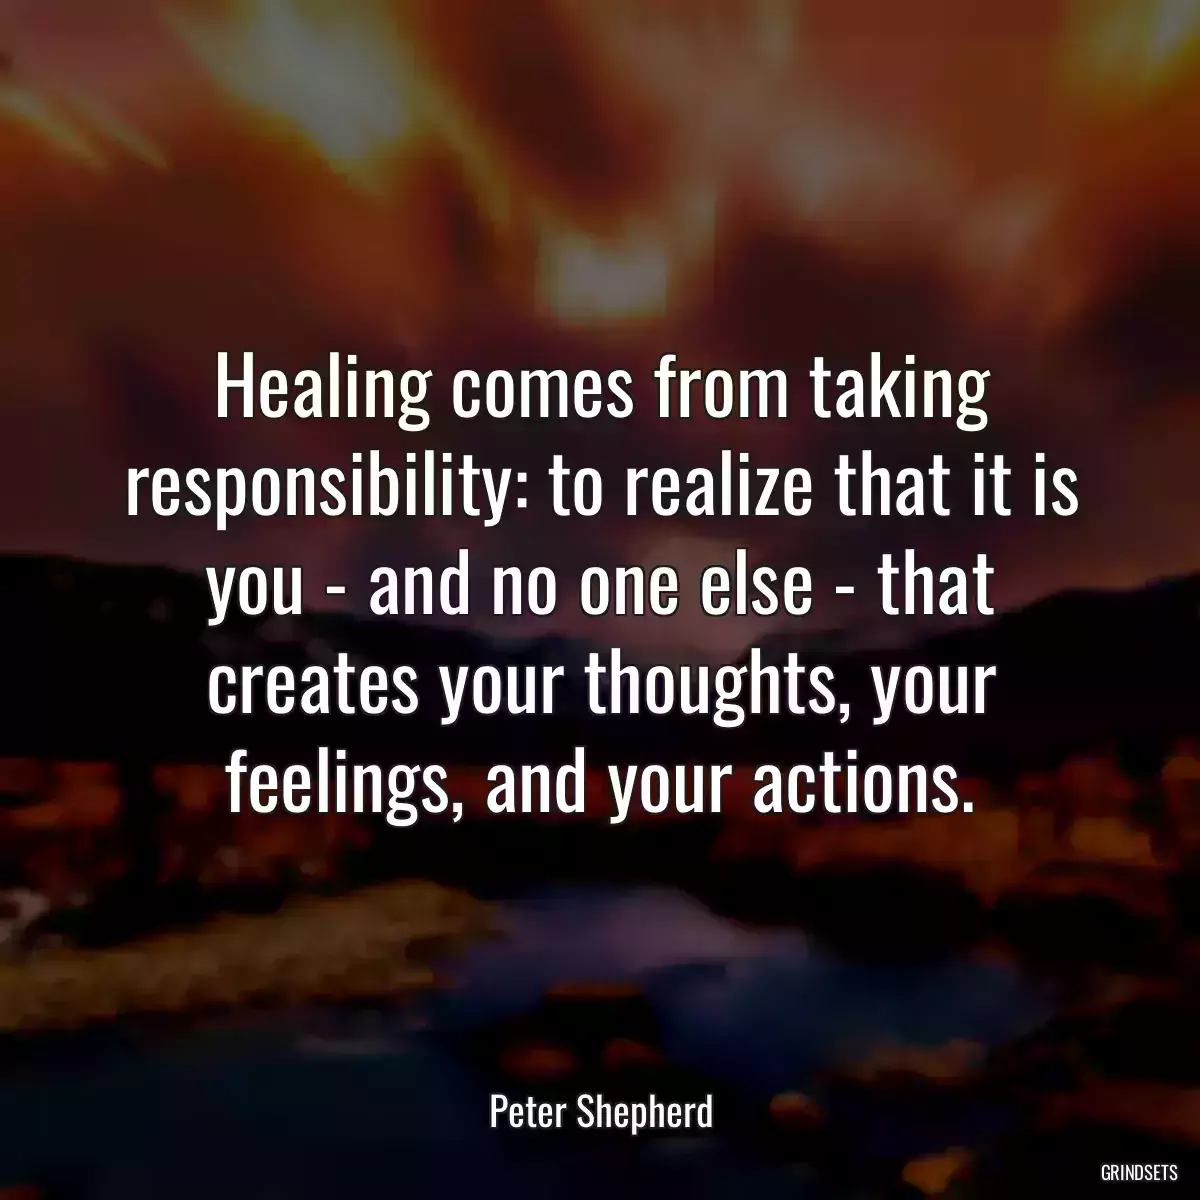 Healing comes from taking responsibility: to realize that it is you - and no one else - that creates your thoughts, your feelings, and your actions.